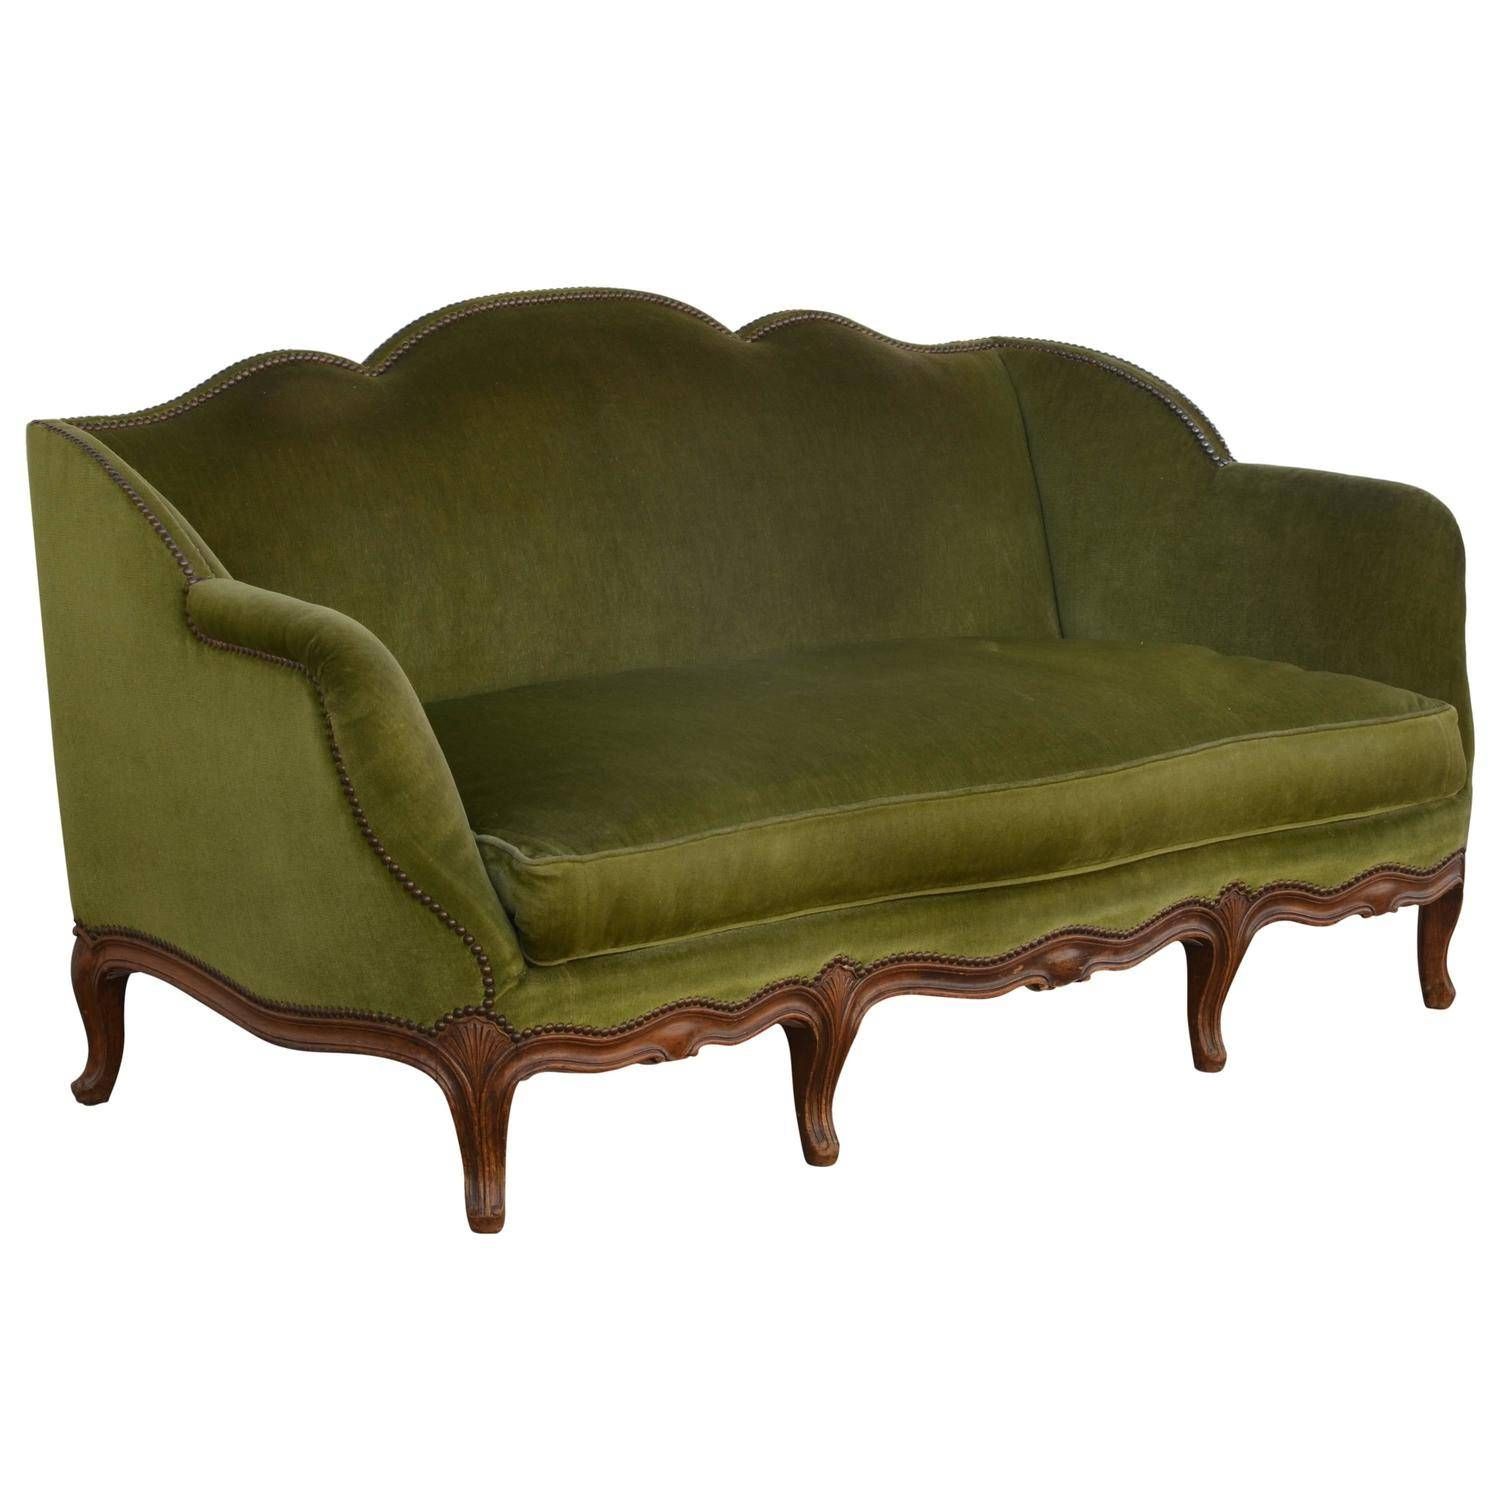 Elegant French, 1940s Louis Xv Style Green Velvet Sofa At 1stdibs Intended For French Style Sofas (View 11 of 25)